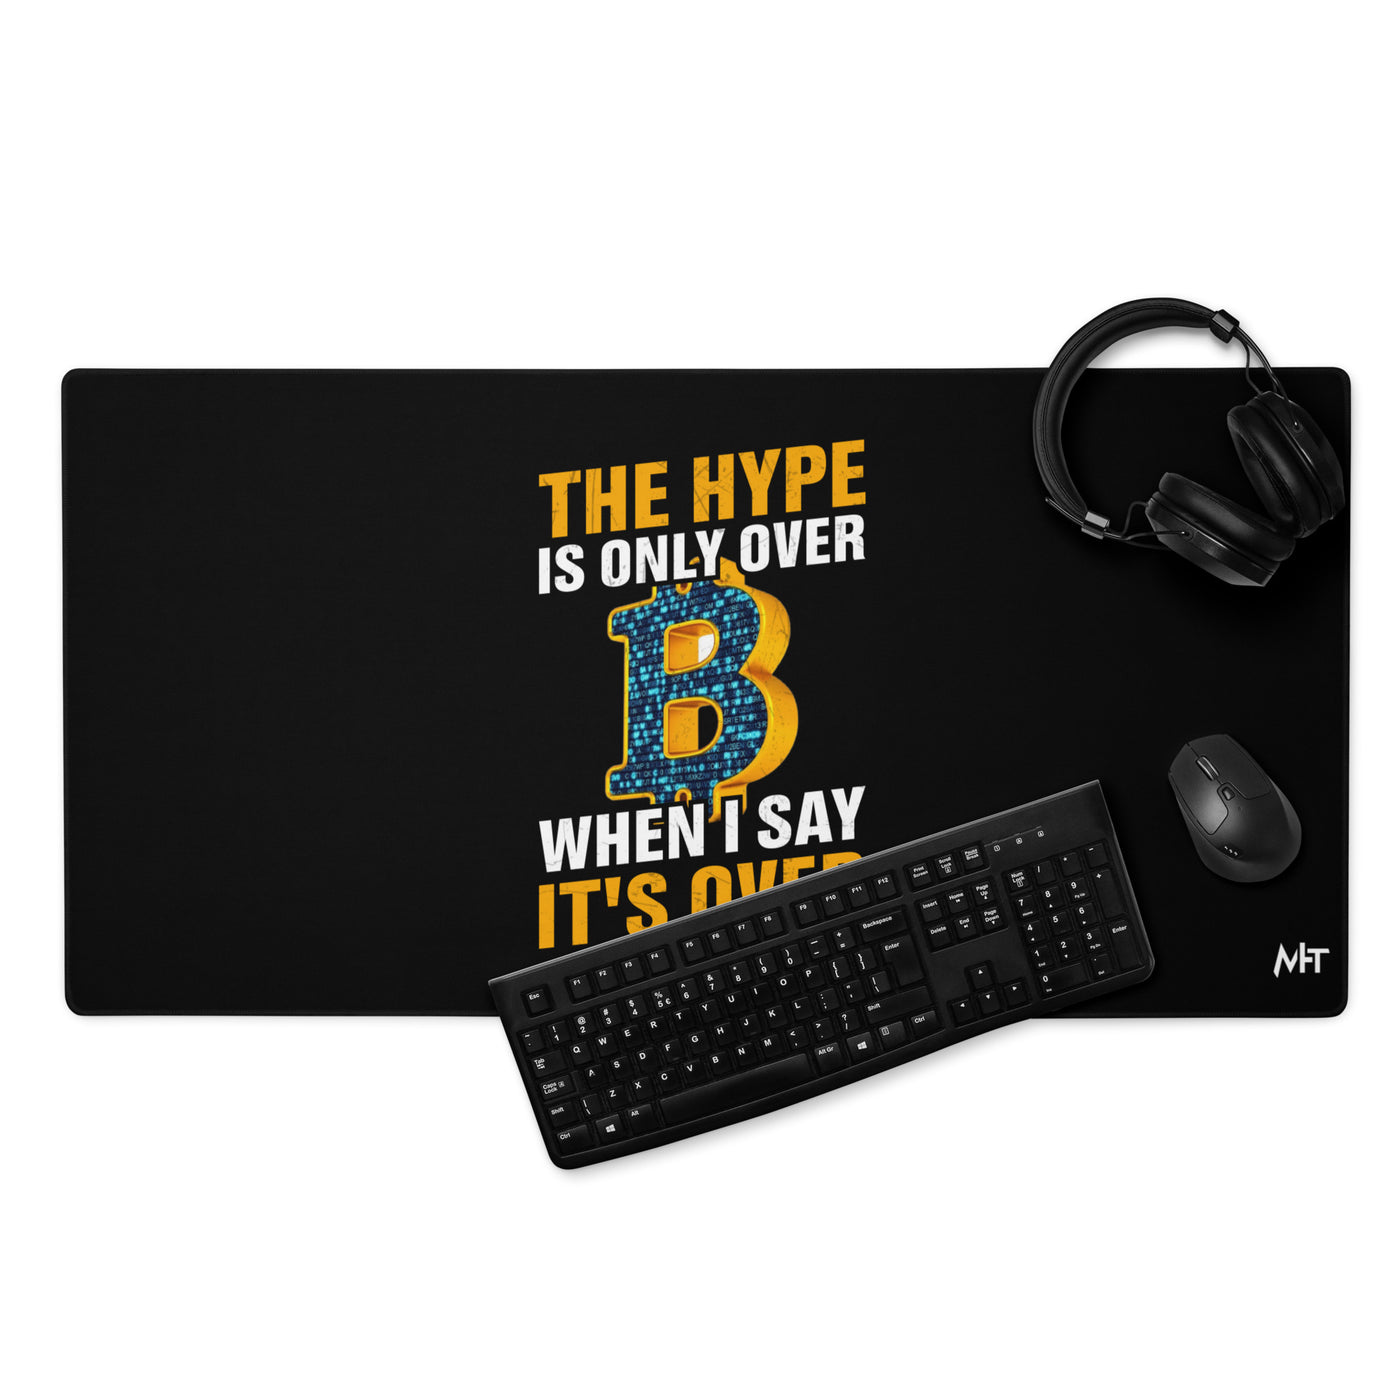 Bitcoin: The Hype is only over, when I said it's over - Desk Mat